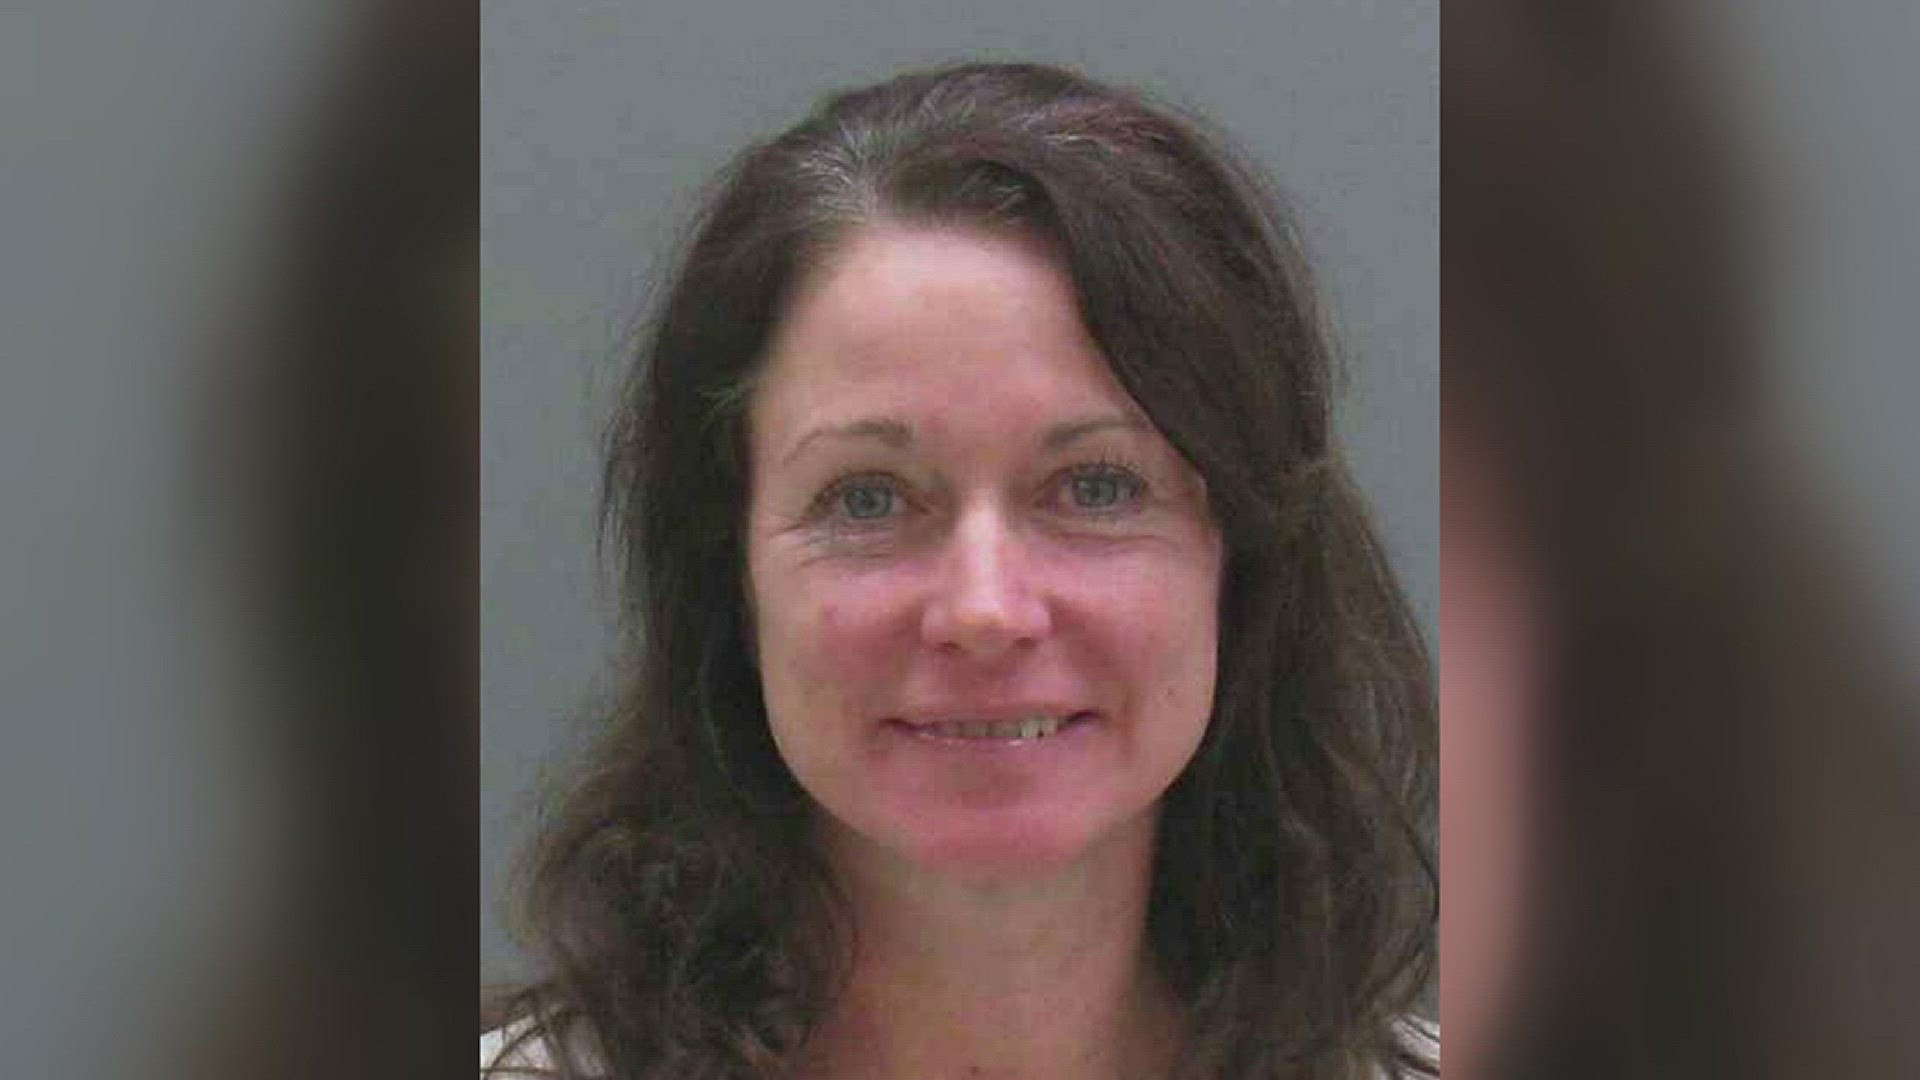 A Grand Haven woman convicted seven times for drunk driving was sentenced to prison on Monday, despite her attorney's request for treatment rather than prison time.